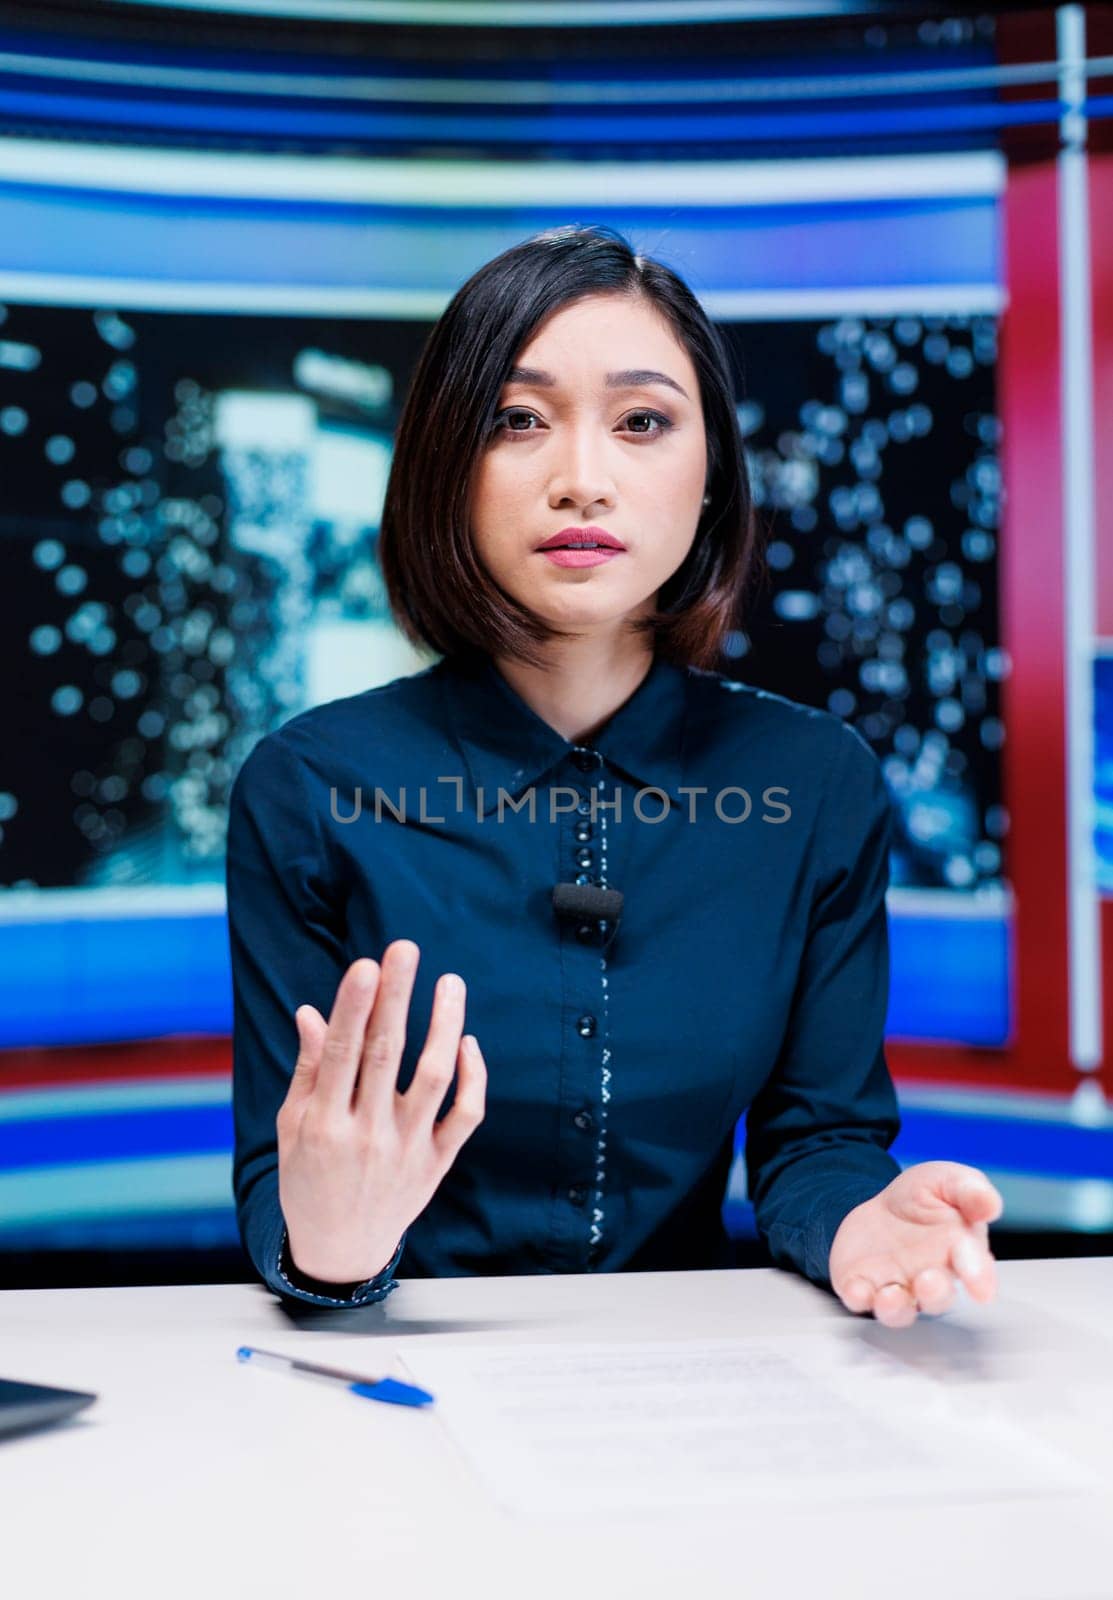 Journalist on late night show hosting entertainment and media segment using headlines to present breaking news. Woman presenter discussing about international reportage with exclusive details.